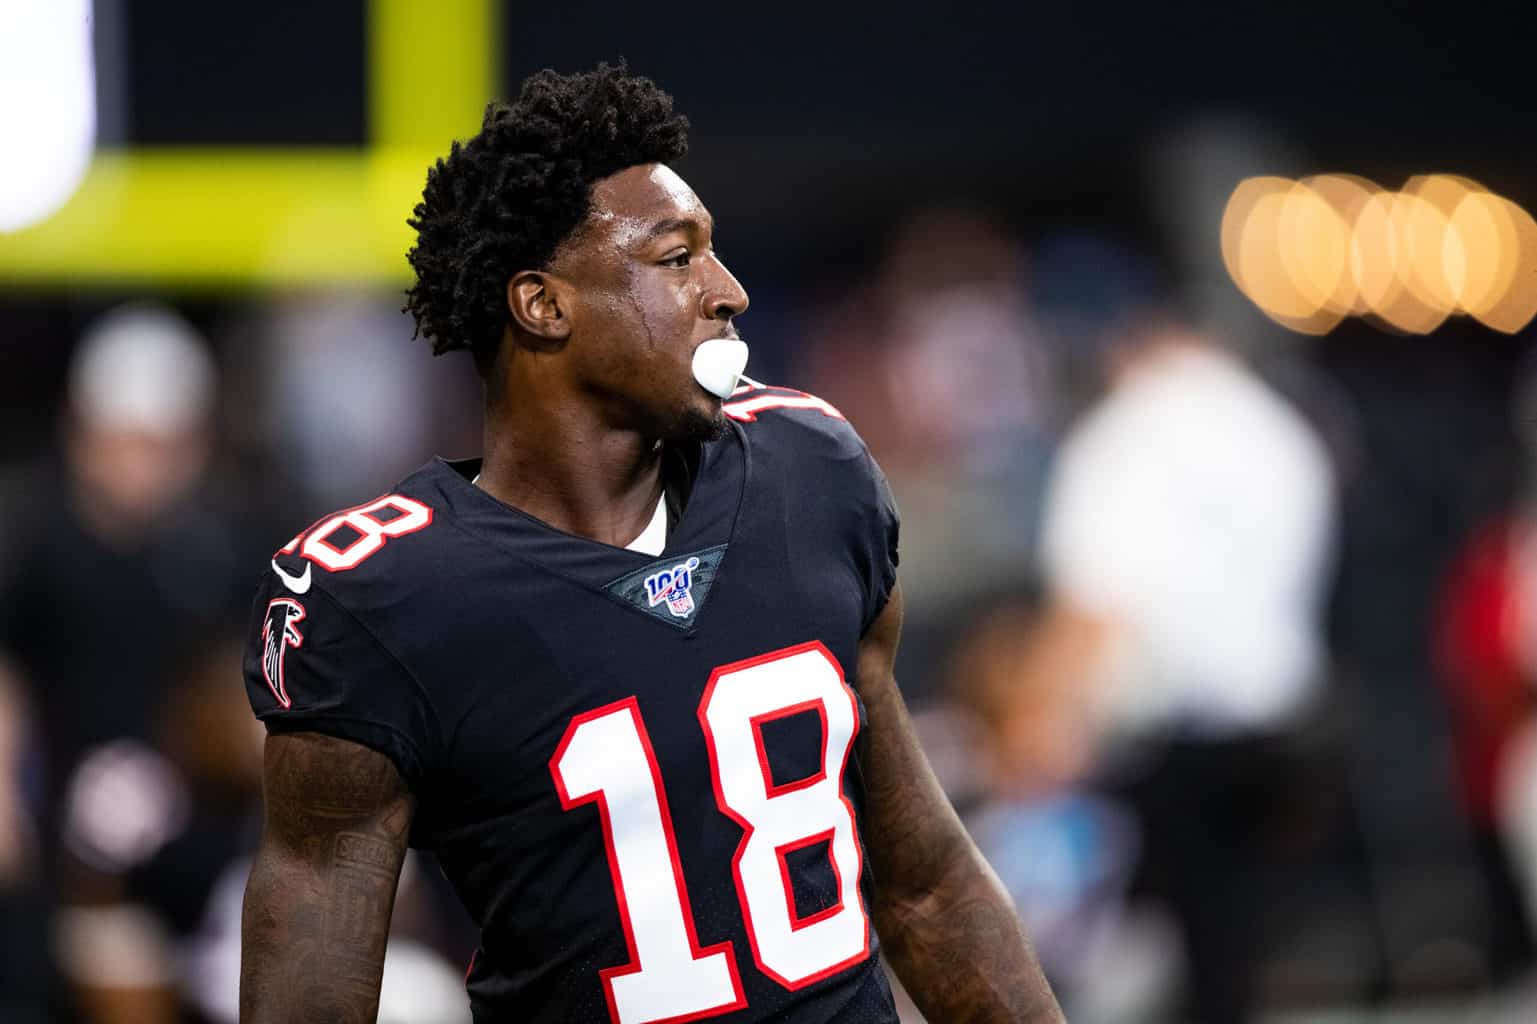 Falcons Updated Outlook: C Ridley Suspended for ’22